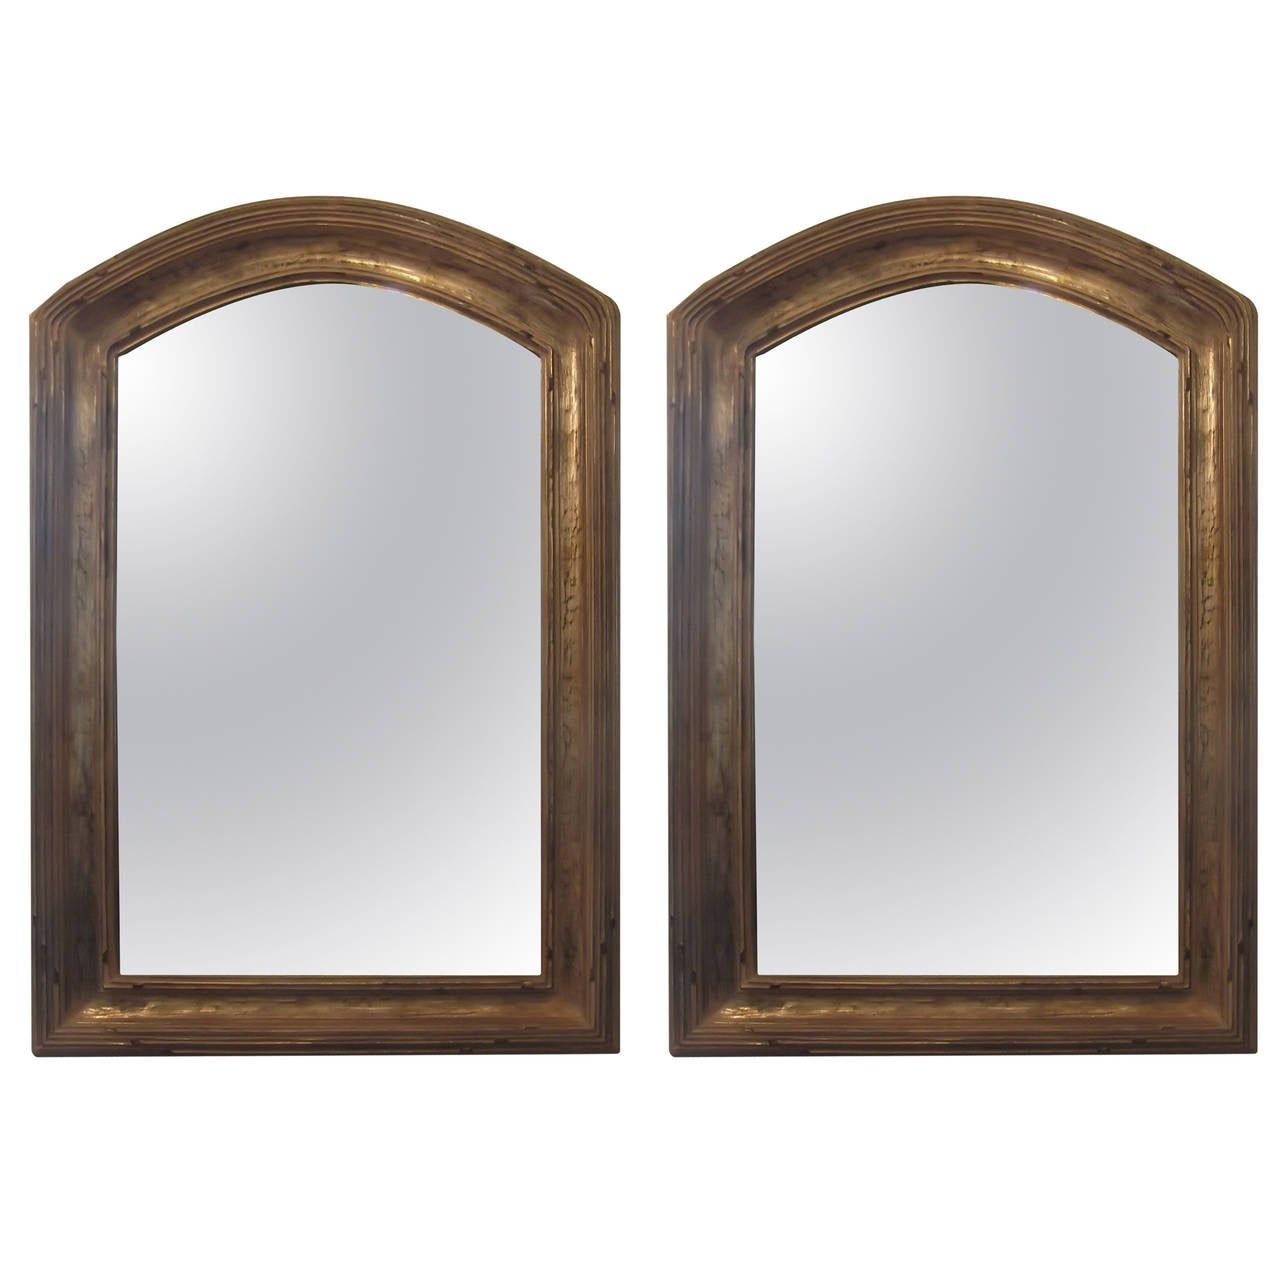 Pair Of Giltwood Arched Top Mirrors At 1stdibs Regarding Gold Arch Top Wall Mirrors (View 7 of 15)